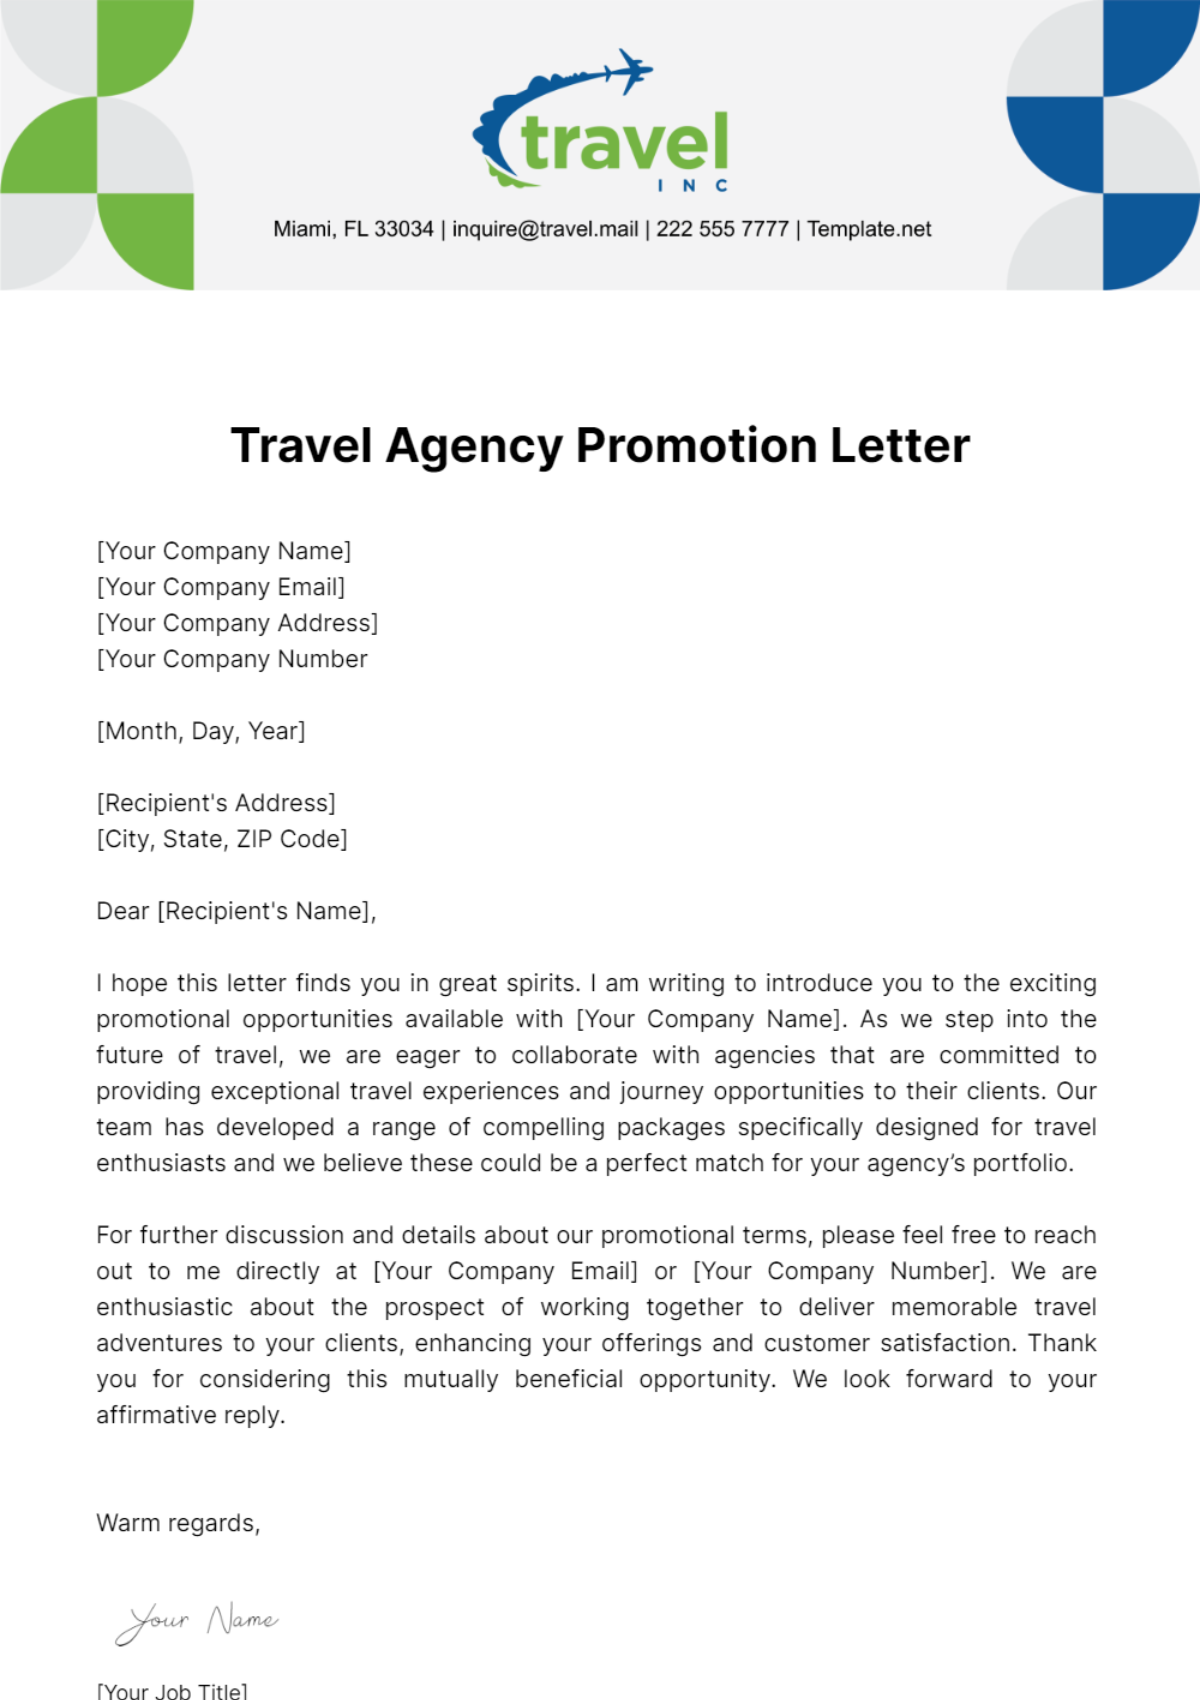 Free Travel Agency Promotion Letter Template